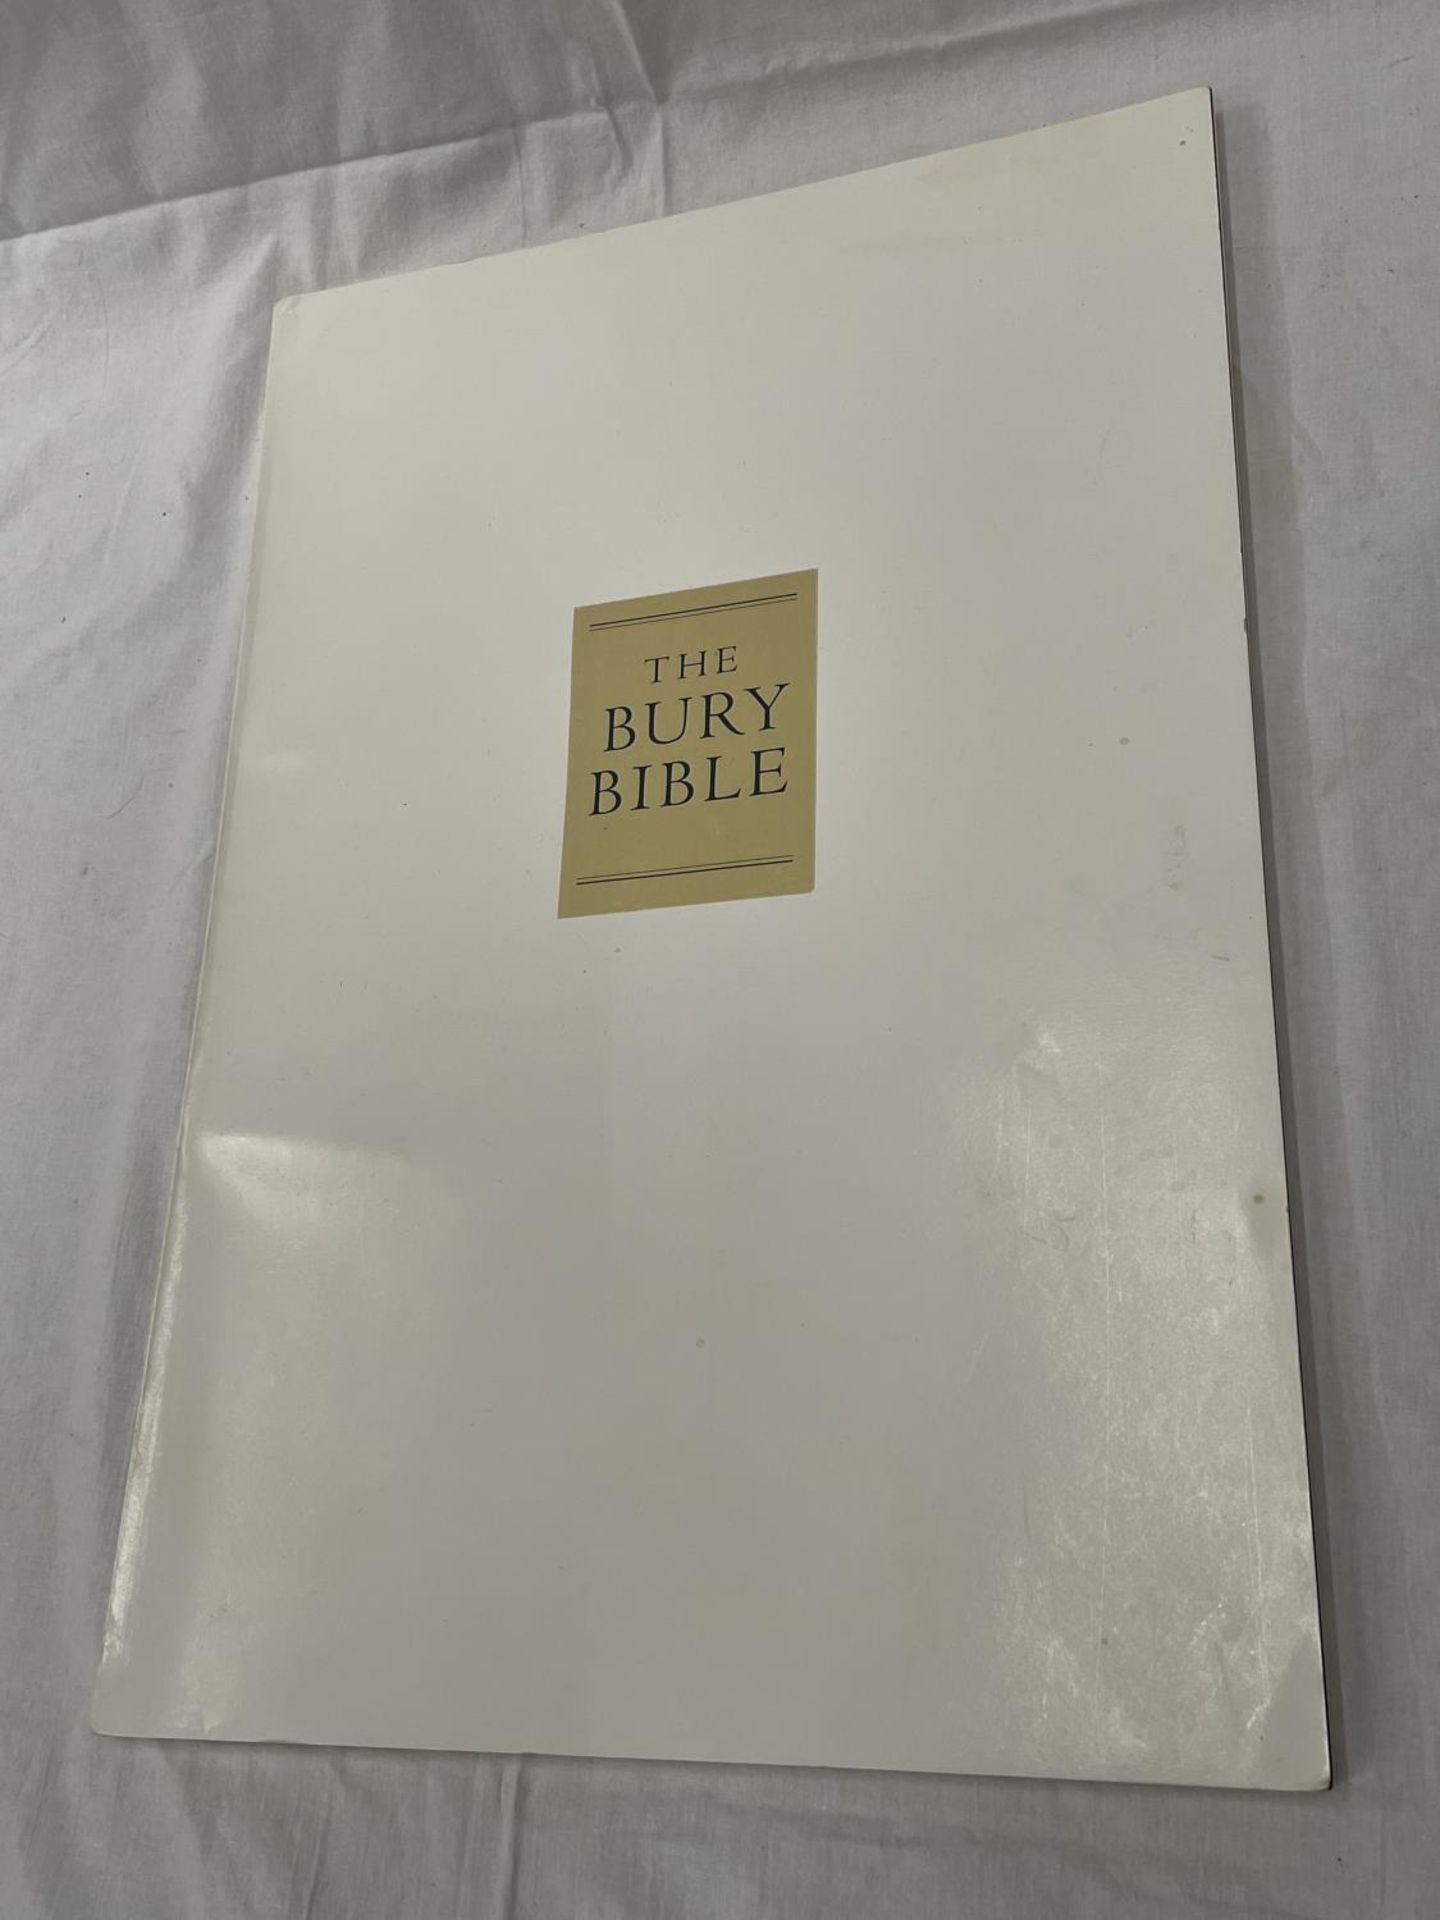 A FIRST EDITION BURY BIBLE BY R M THOMPSON PUBLISHED BY THE BOYDELL PRESS YUSHODO CO. LTD 2001